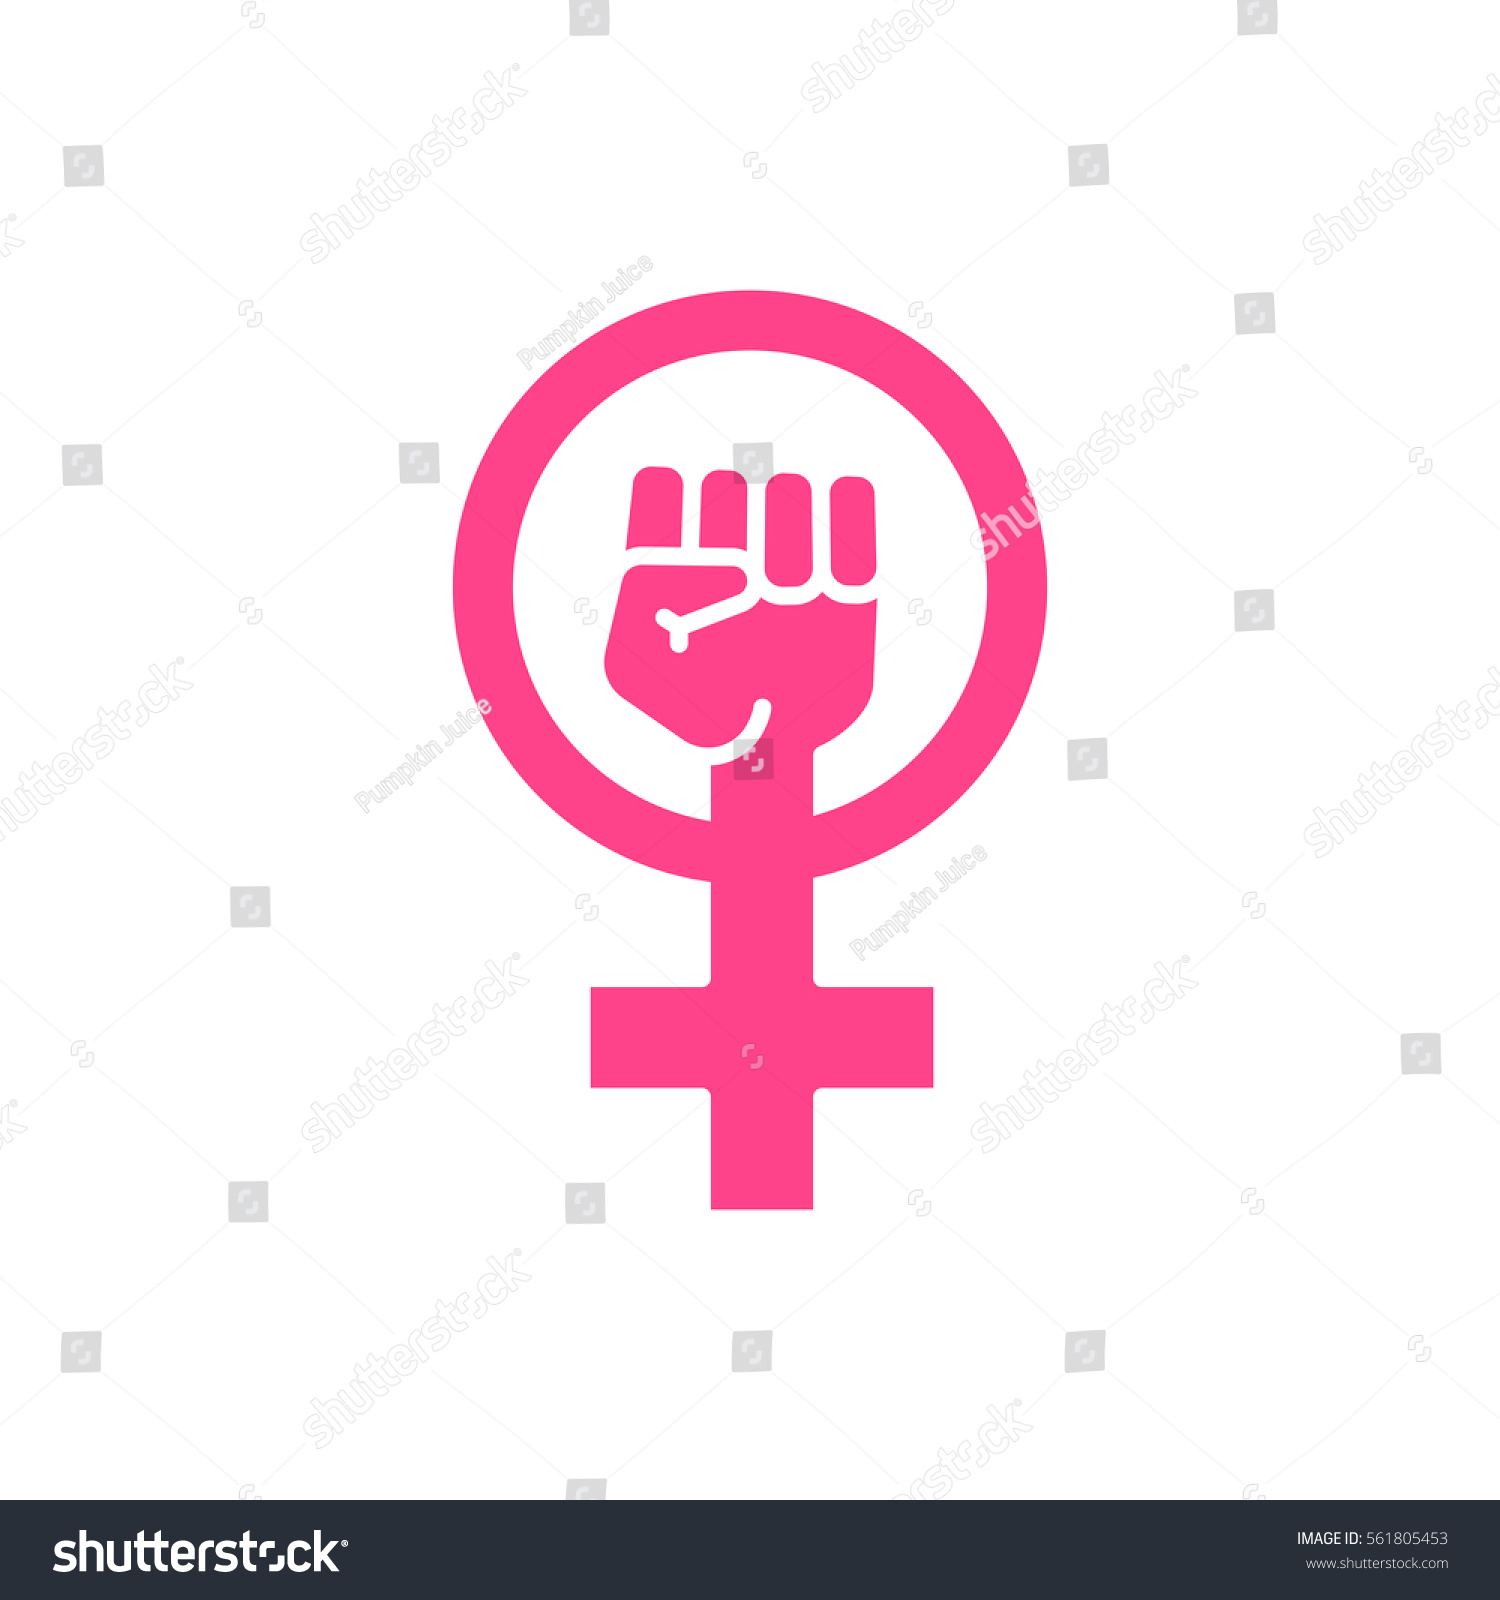 Female Woman Feminism Protest Hand Icon Stock Vector Royalty Free 561805453 Shutterstock 